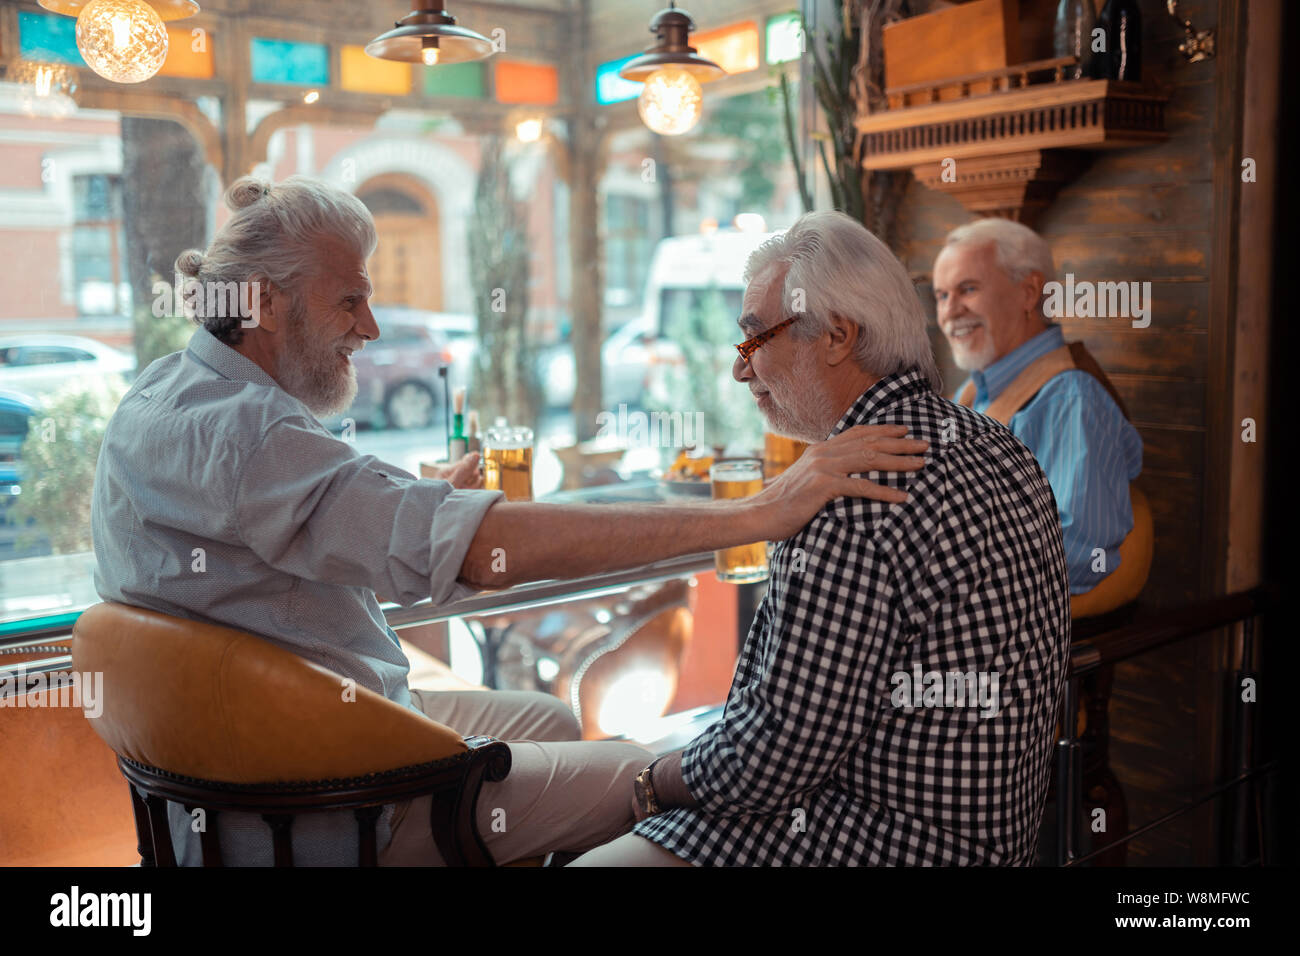 Three retired men chilling in pub while drinking beer Stock Photo